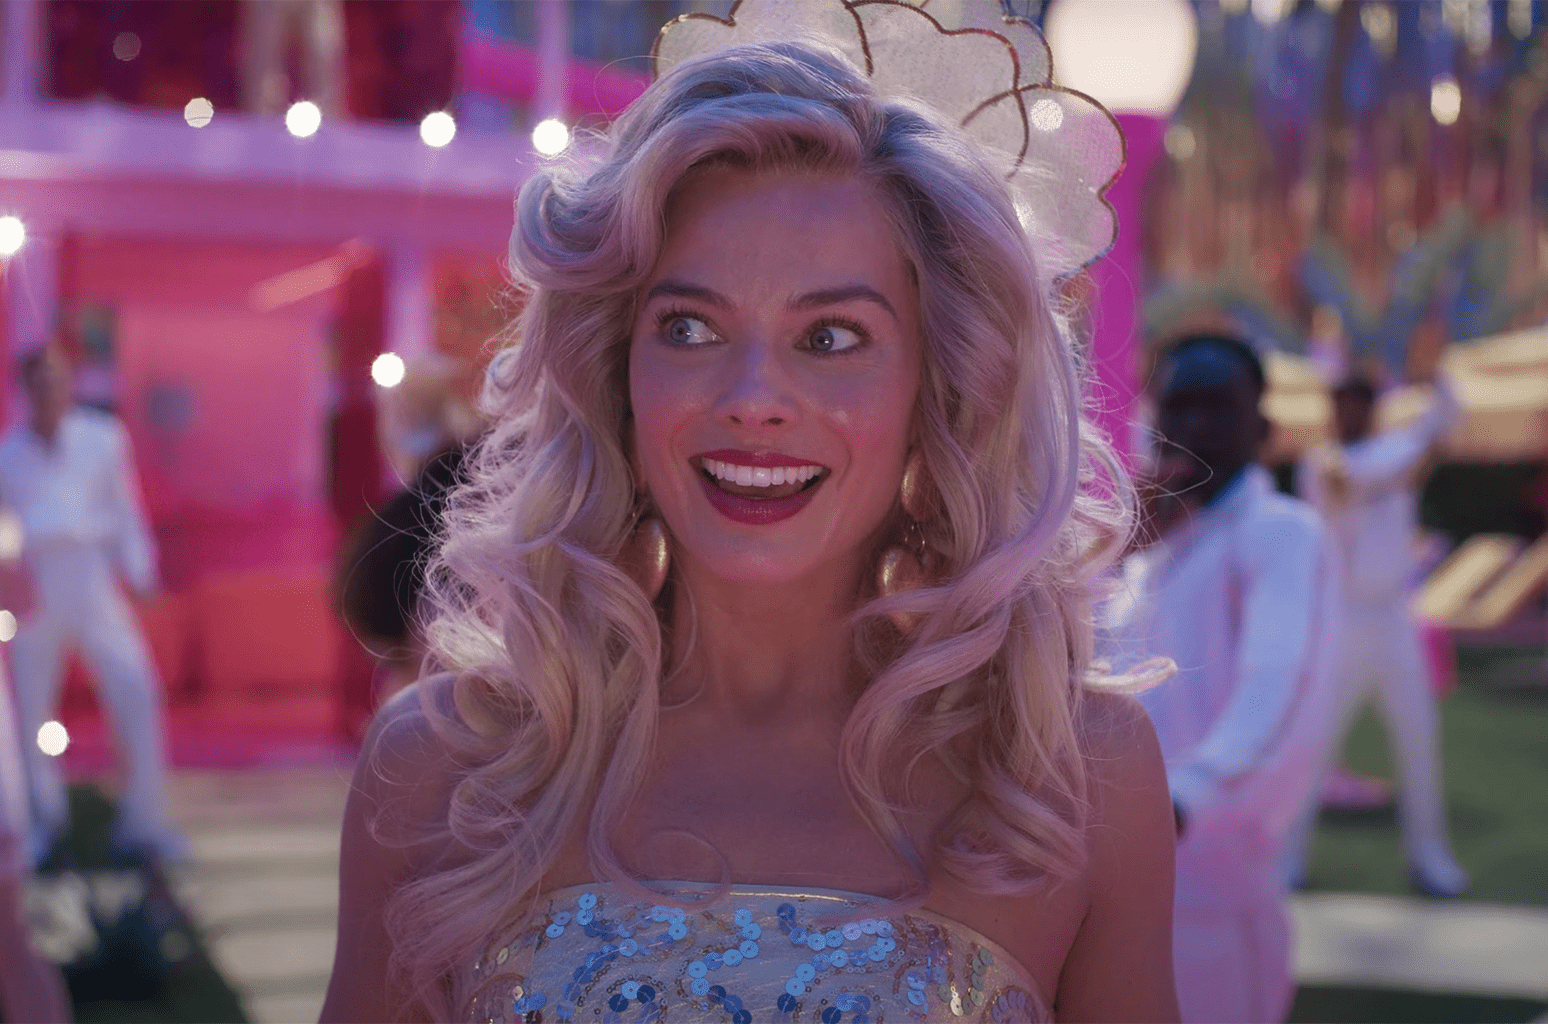 Margot Robbie Says ‘Oppenheimer’ Producer Told Her ‘Barbie’ Should Move Its Release Date